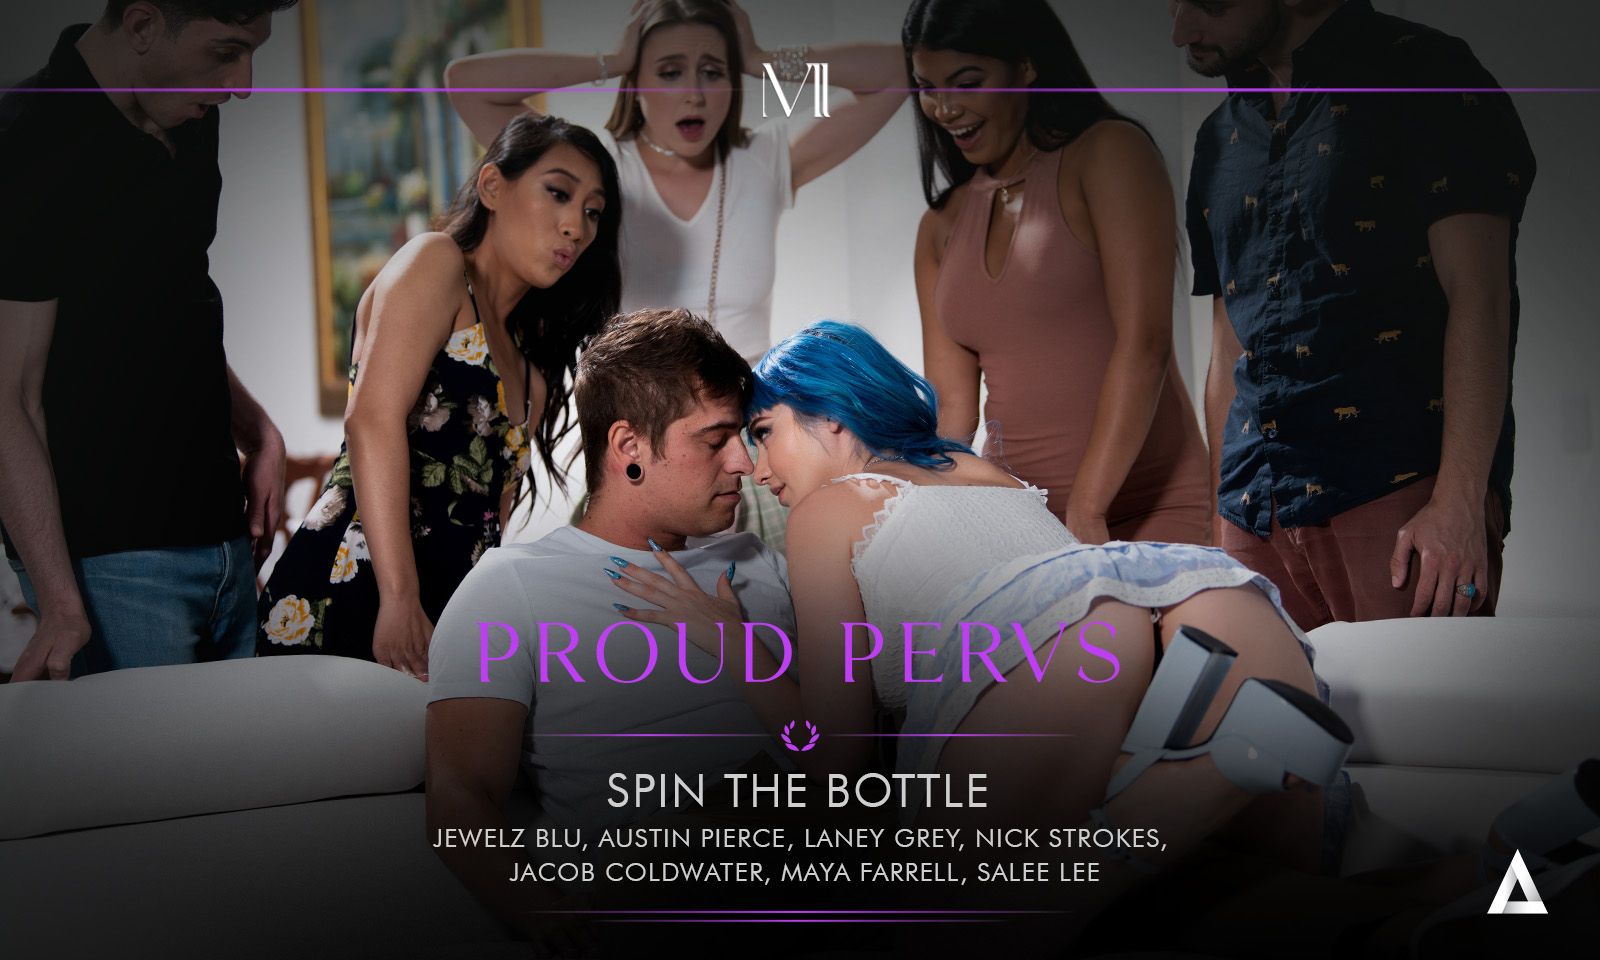 Modern-Day Sins' 'Proud Pervs' Stages Game of 'Spin the Bottle'